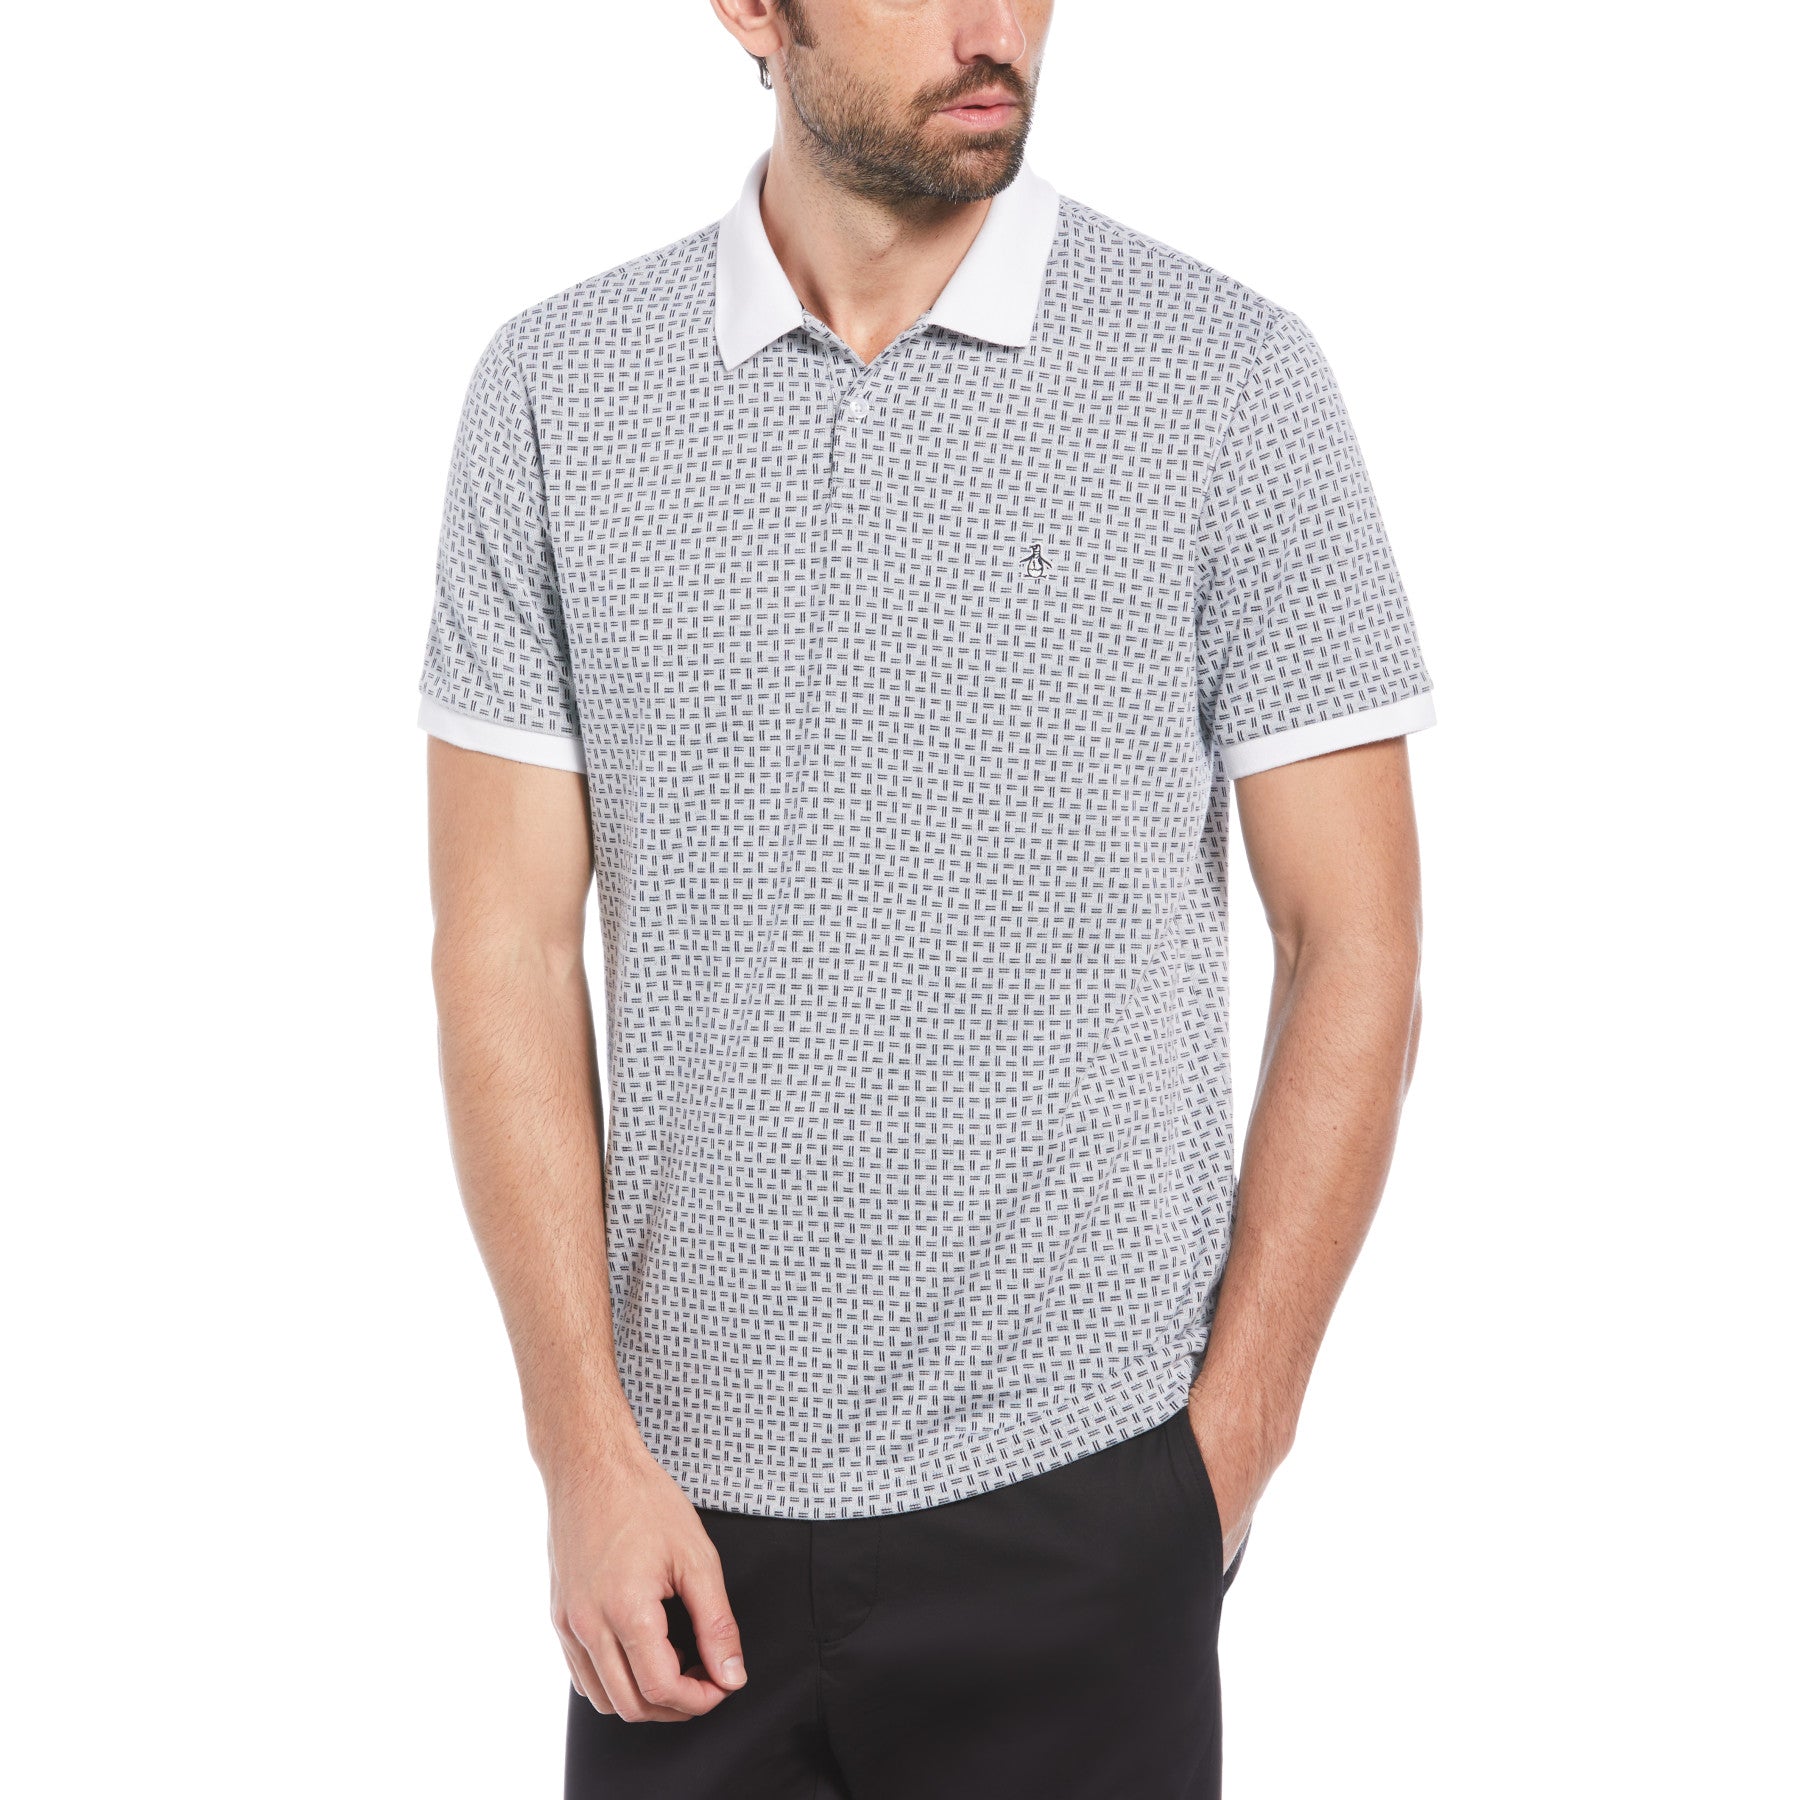 View Jacquard Polo In Bright White information